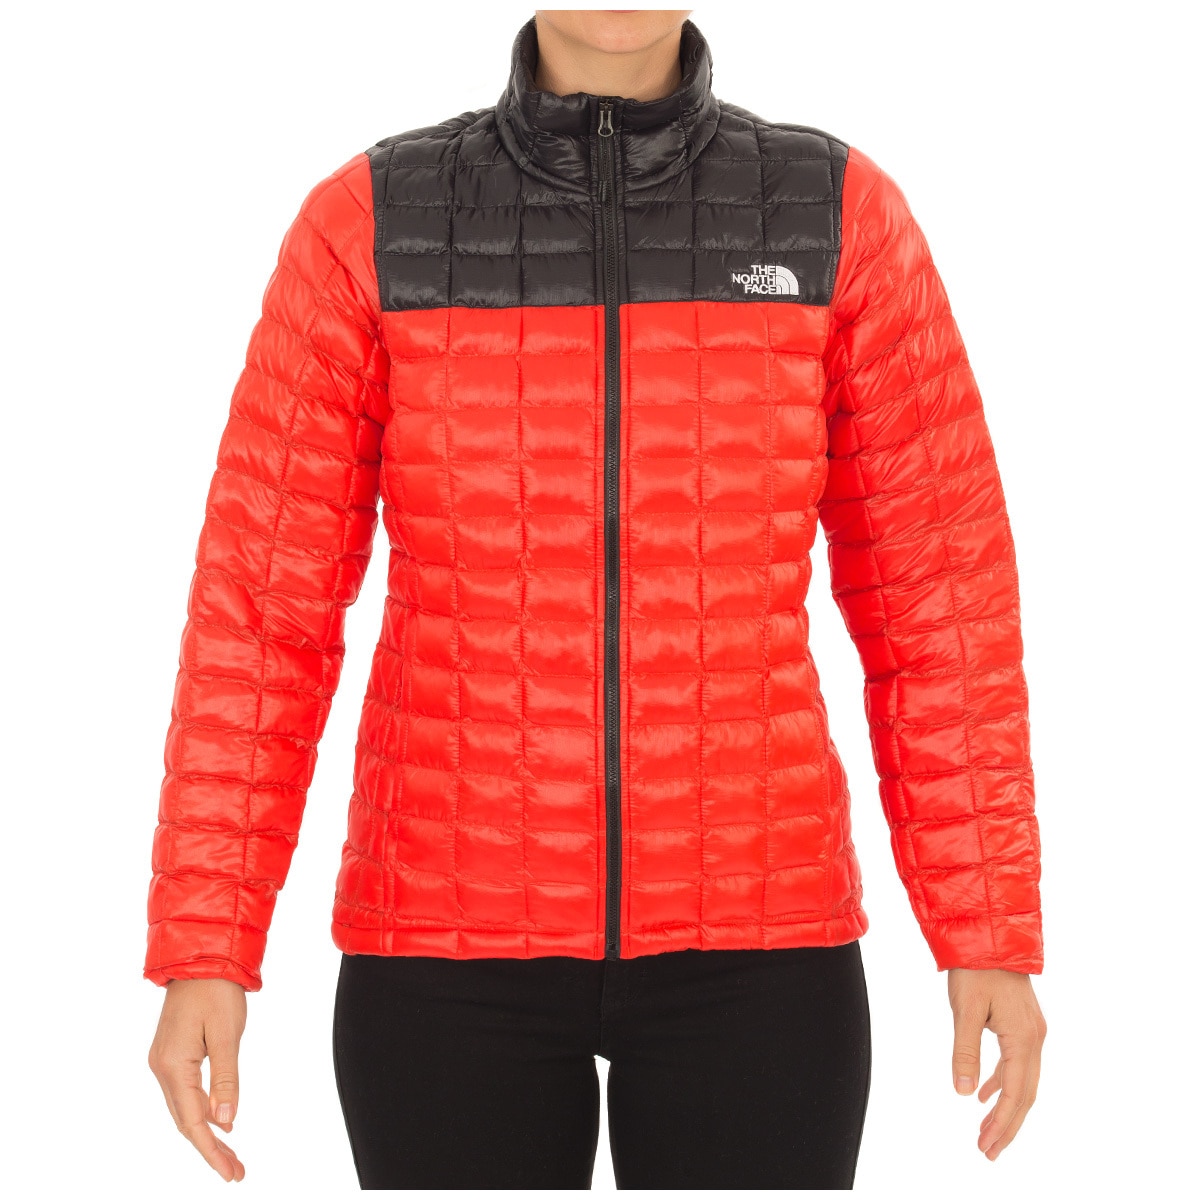 costco the north face jacket Online 